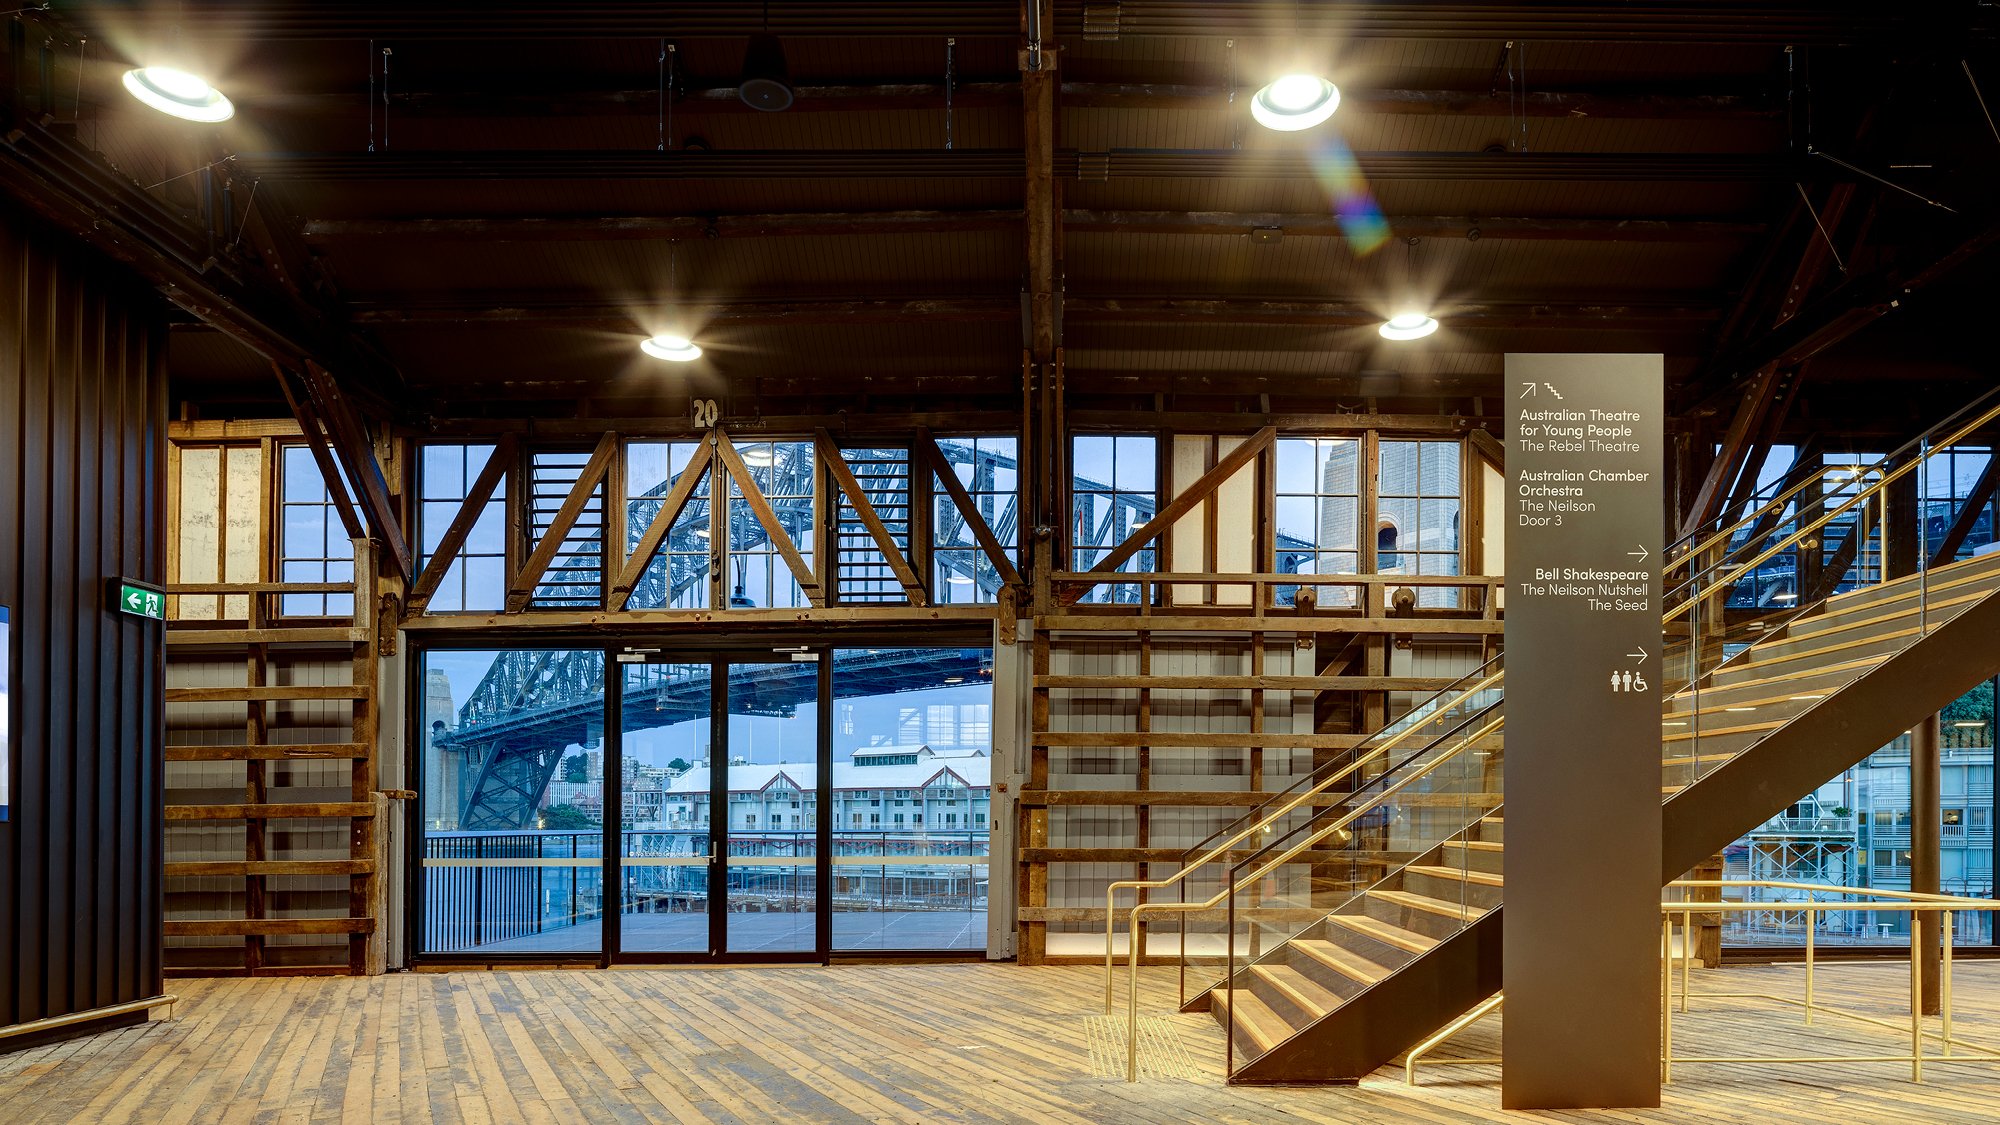 Inside a restored timber building at Walsh Bay Arts Precinct, with Sydney Harbour Bridge in the background viewed through the window